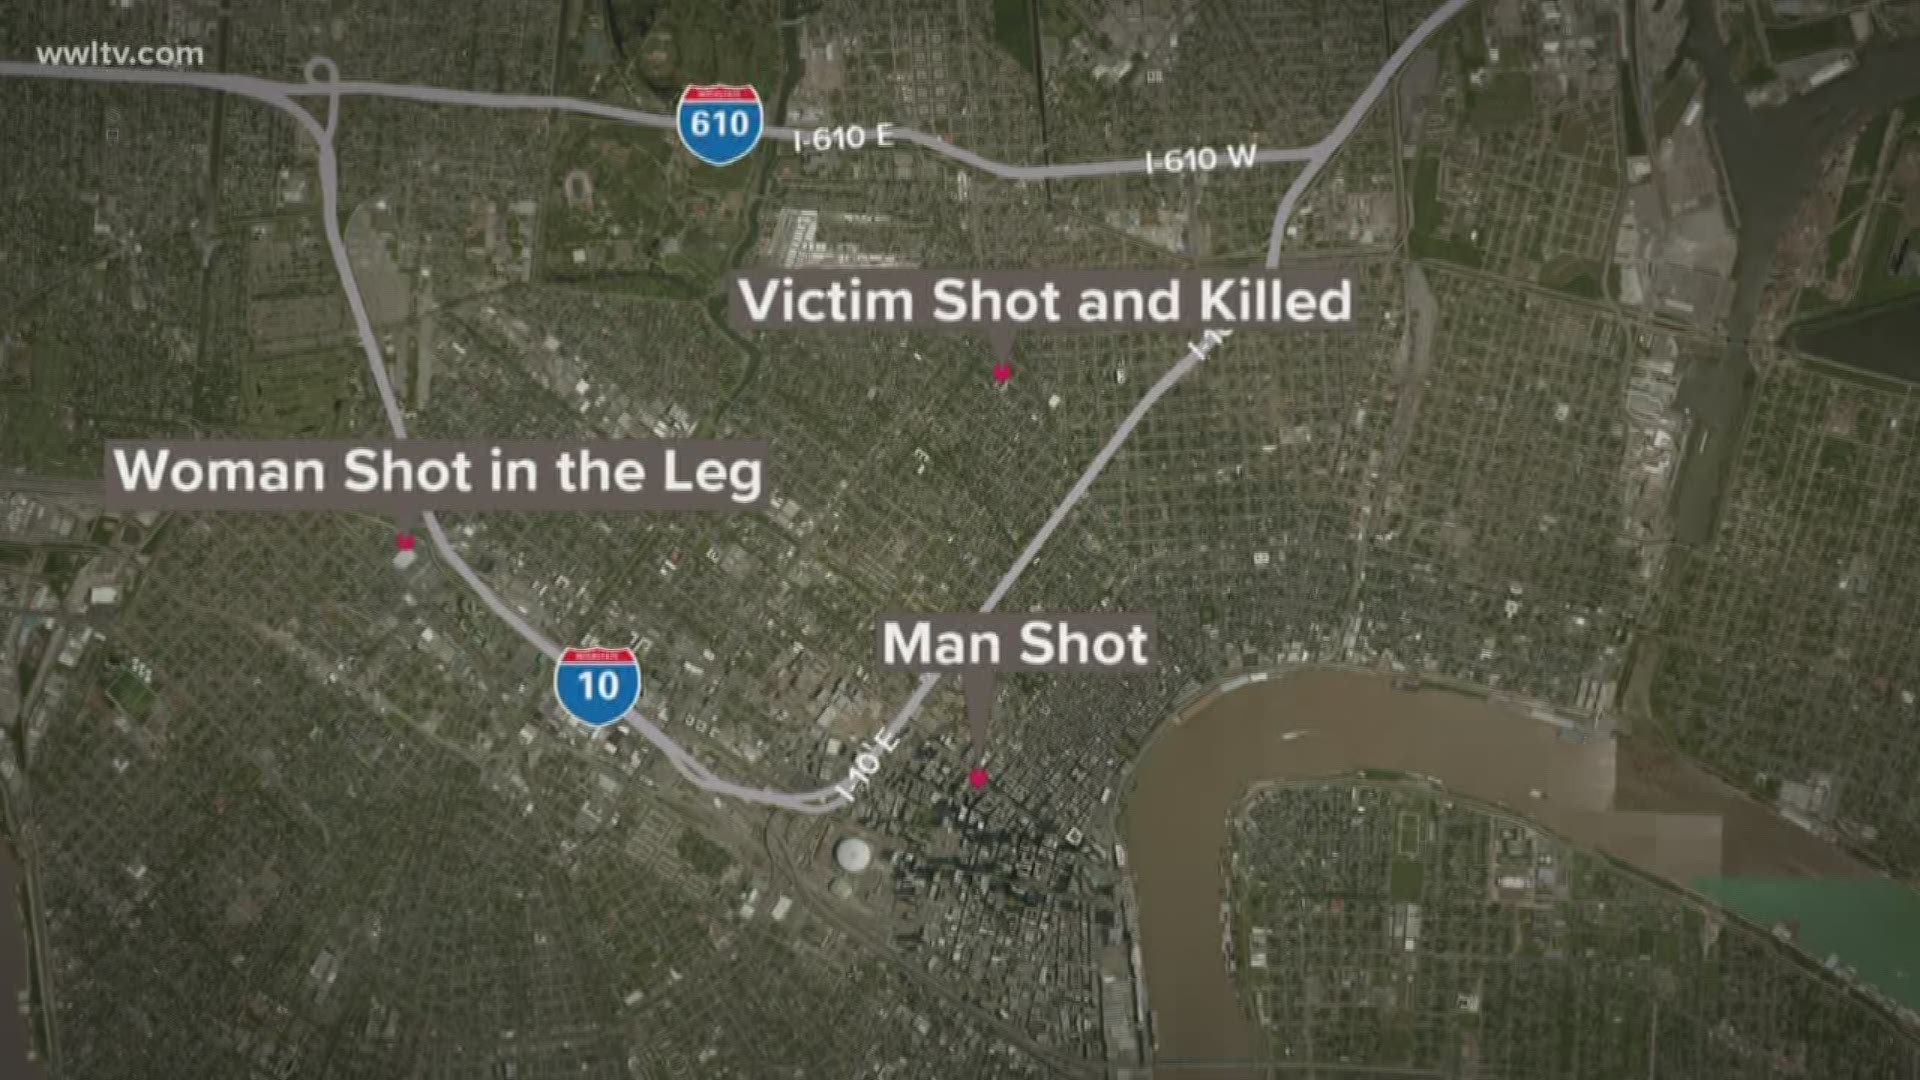 According to the New Orleans Police Department, a young girl was wounded in the first shooting around 10 p.m. Thursday.